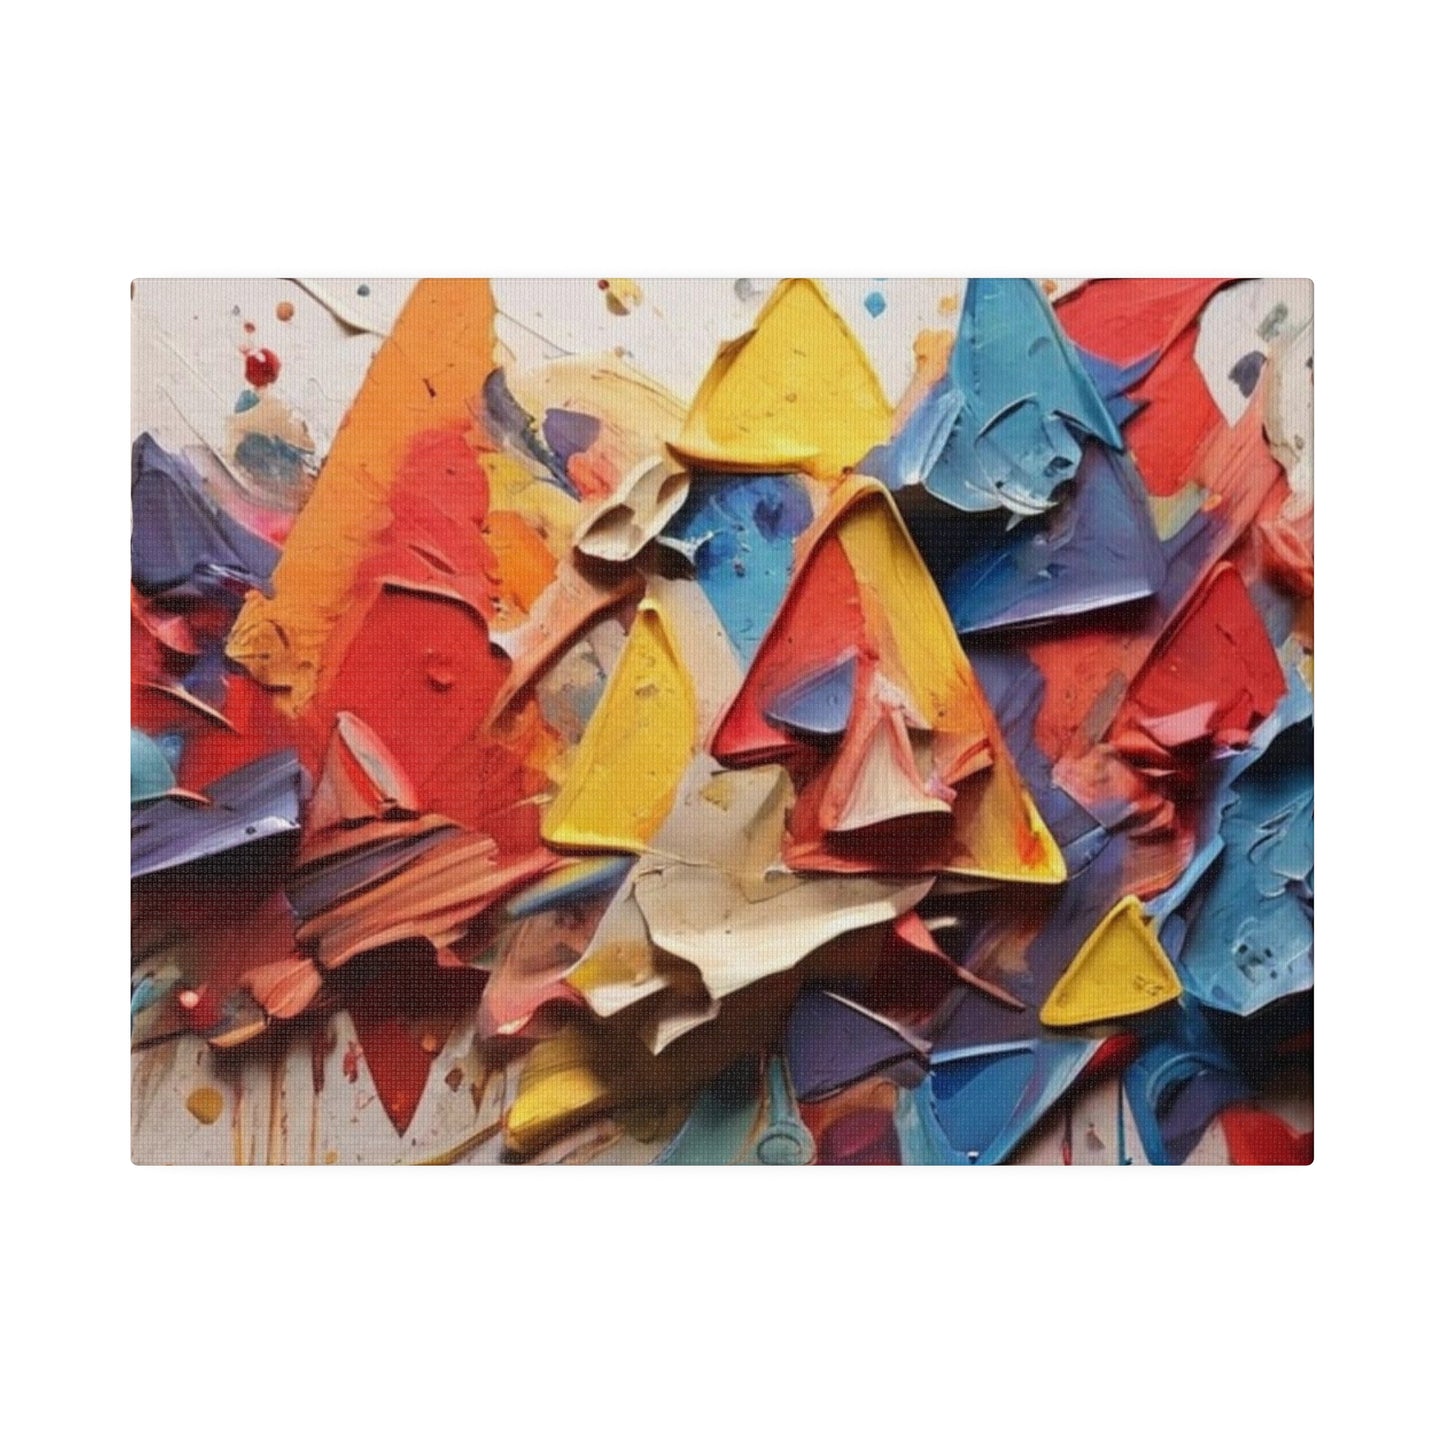 Messy Colourful Triangles - Matte Canvas, Stretched, 0.75"